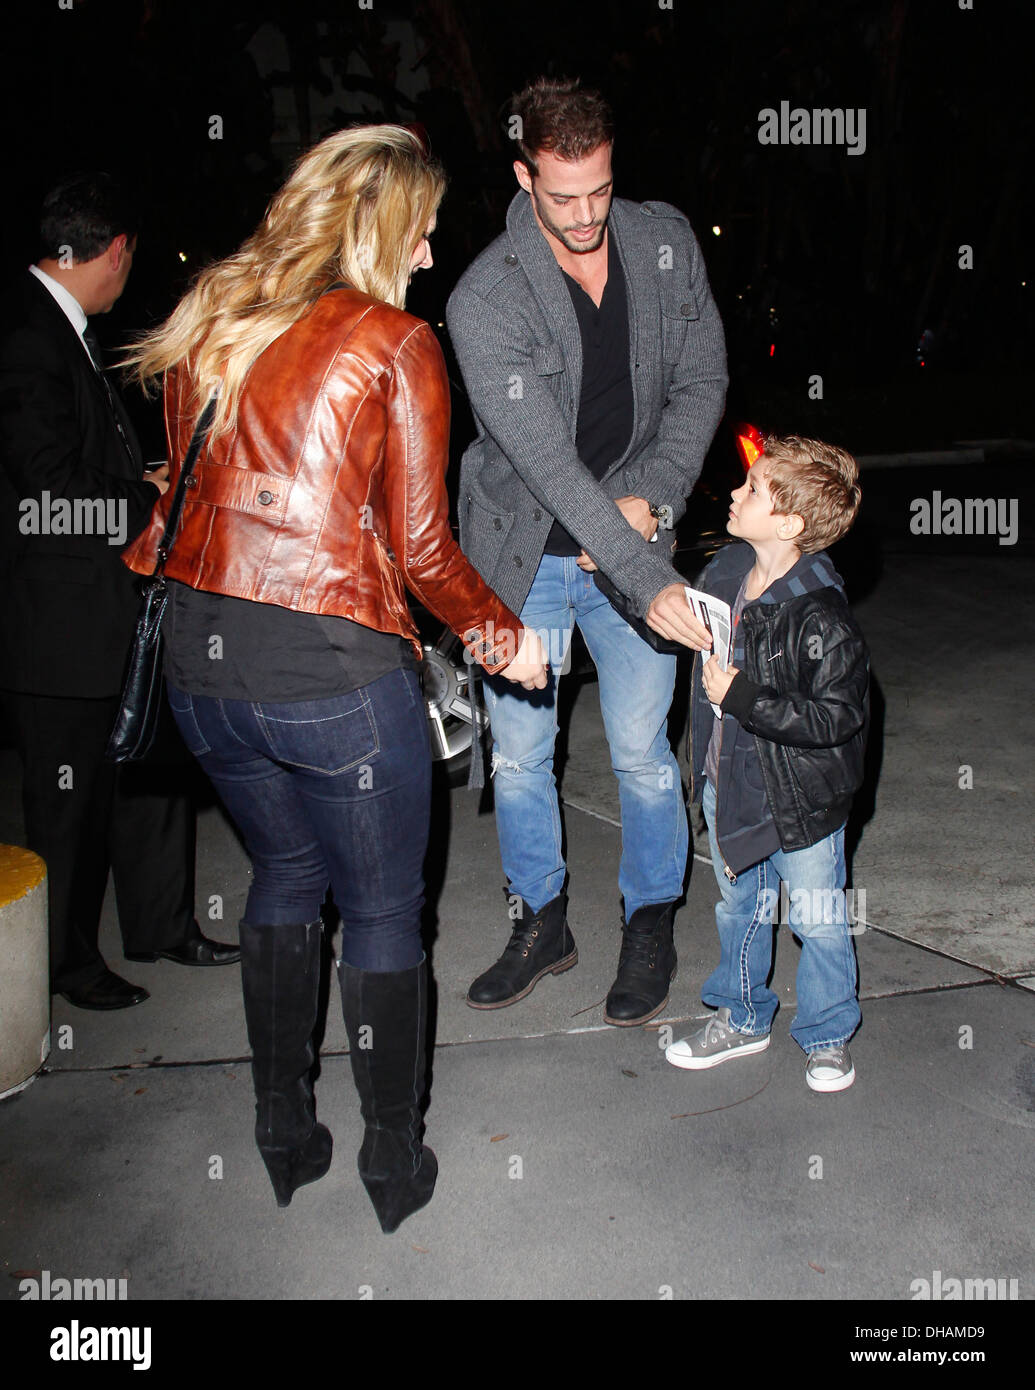 William Levy takes his son Christopher Alexander to see LA Lakers play at  Staples Center Los Angeles California - 13.04.12 Stock Photo - Alamy